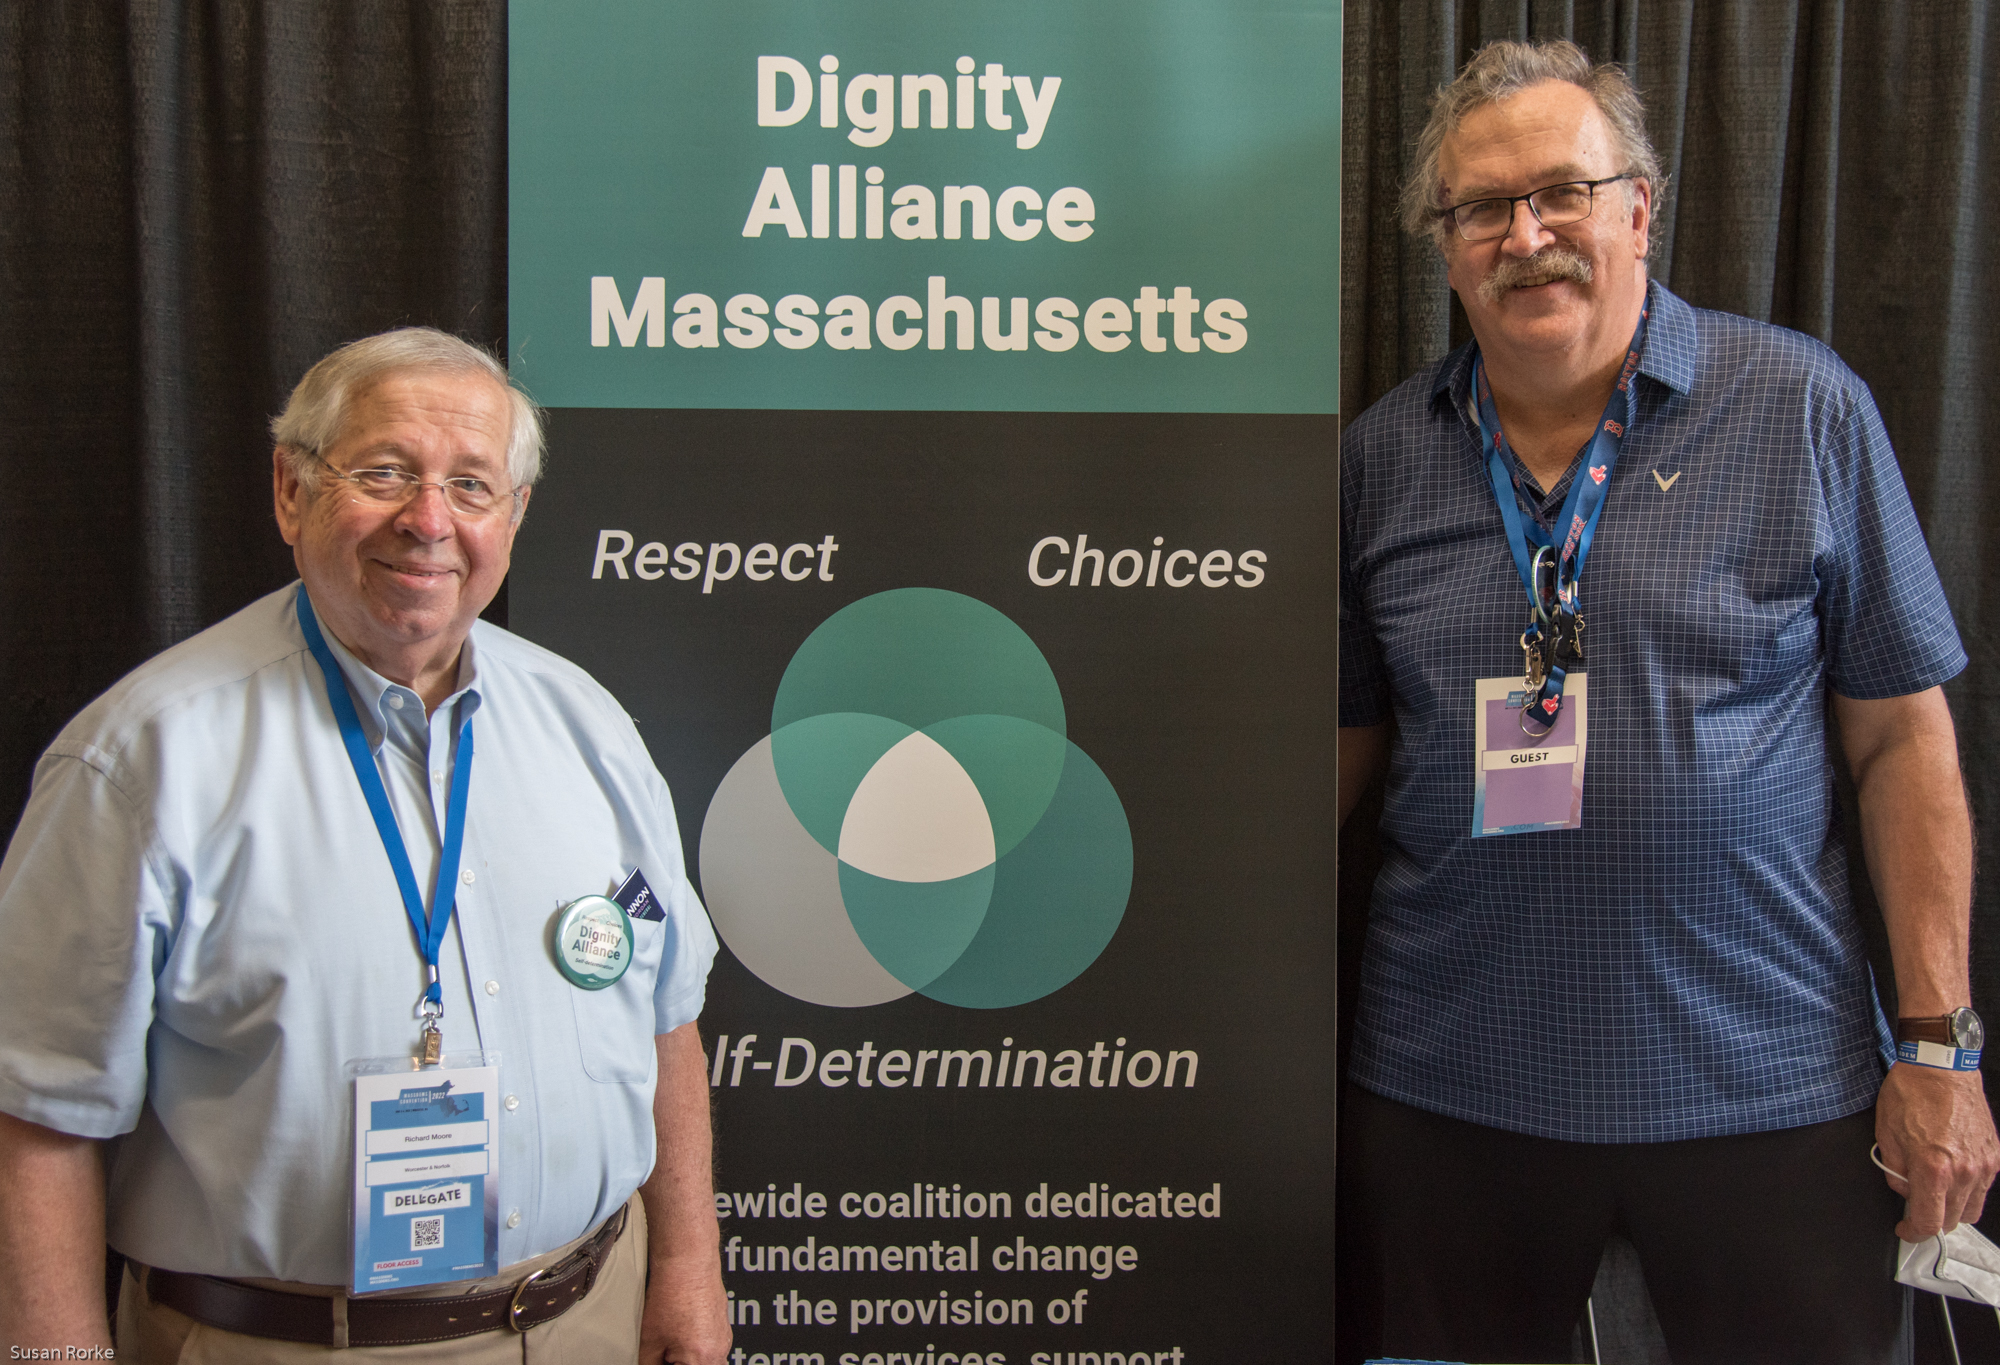 Richard Moore and Paul Lanzikos in front of the Dignity Alliance MA banner